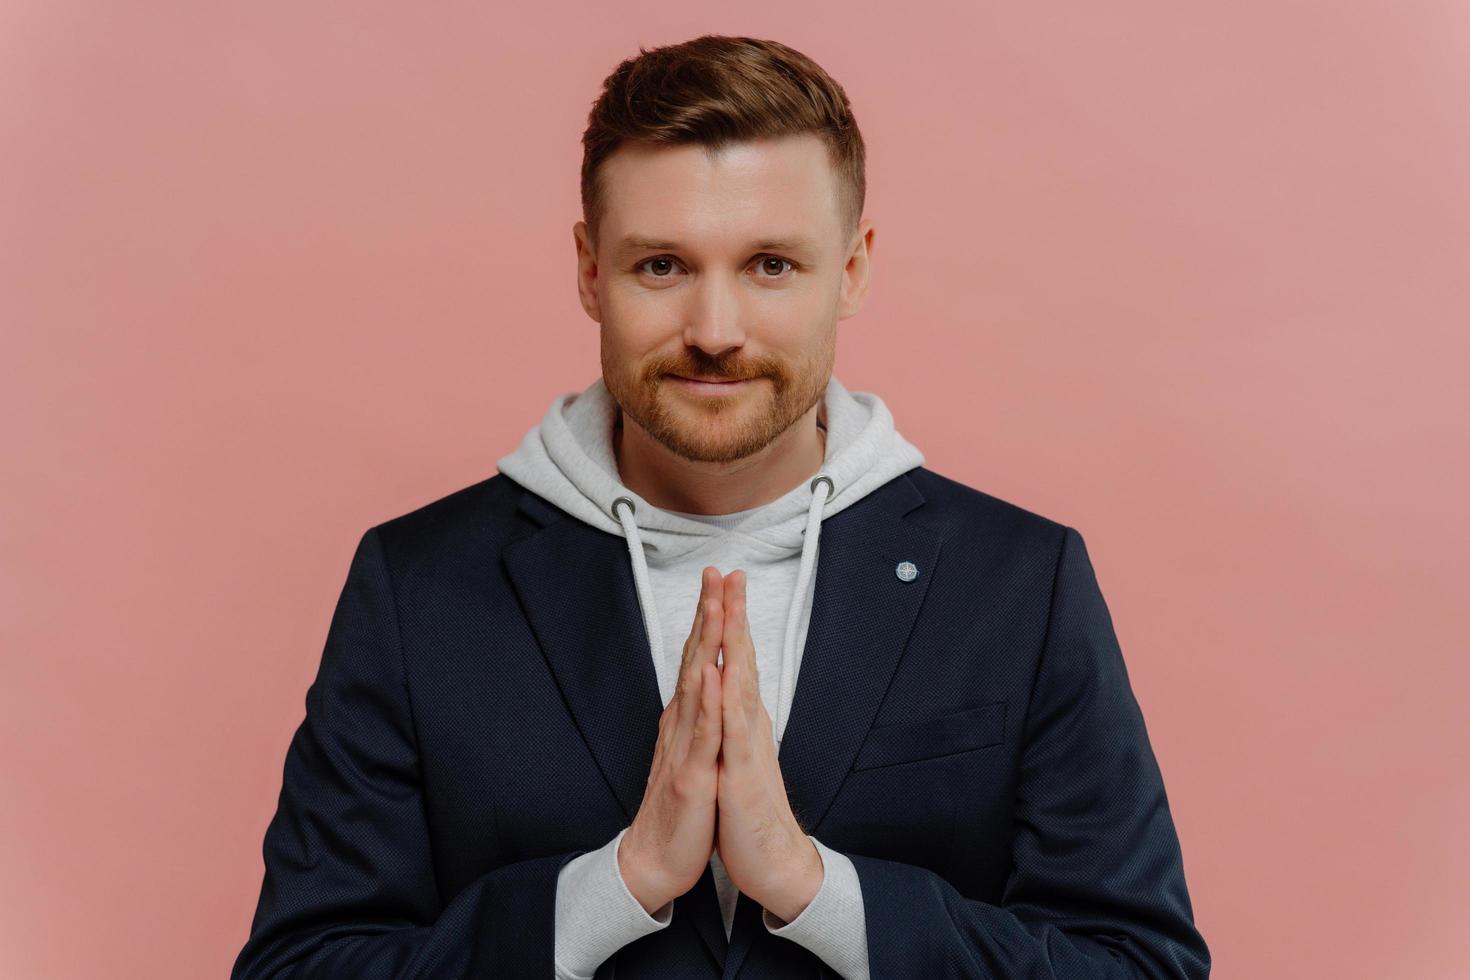 Serious bearded adult man keeps palms pressed together prays for something looks directly at camera believes in something good happen poses against pink background. Handsome guy makes request photo